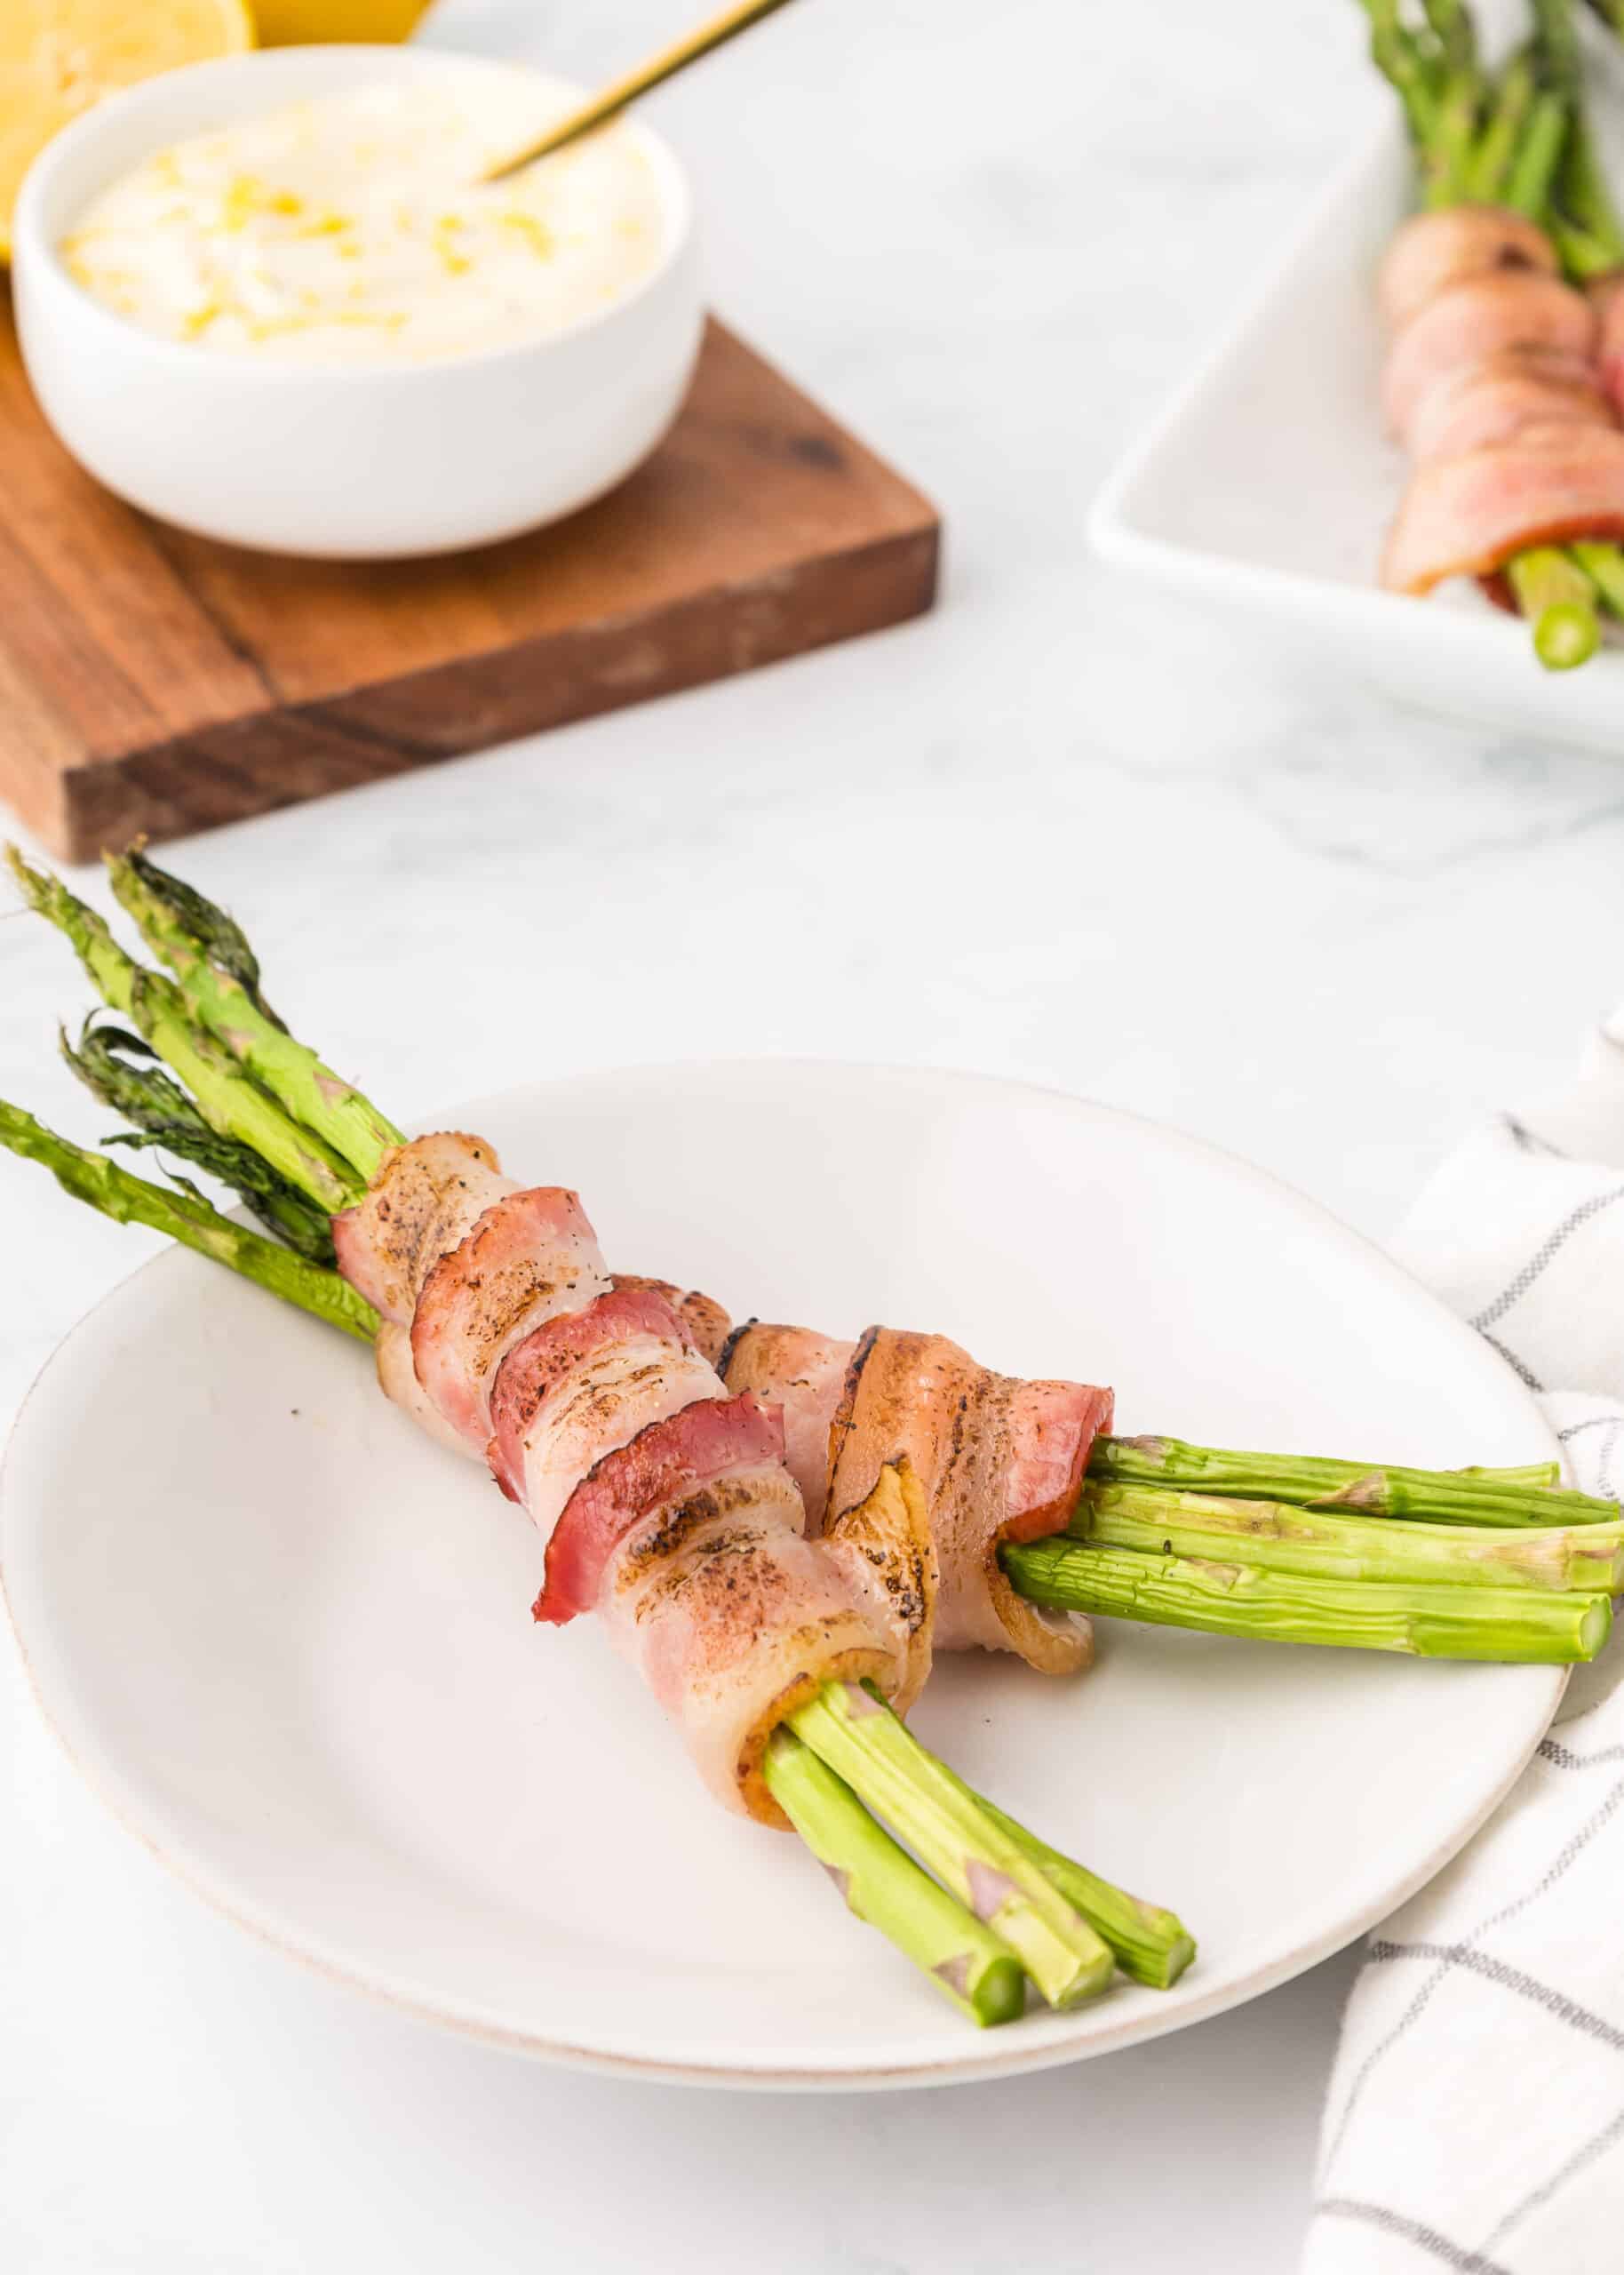 asparagus wrapped in bacon keto (grilled bacon wrapped asparagus recipe)